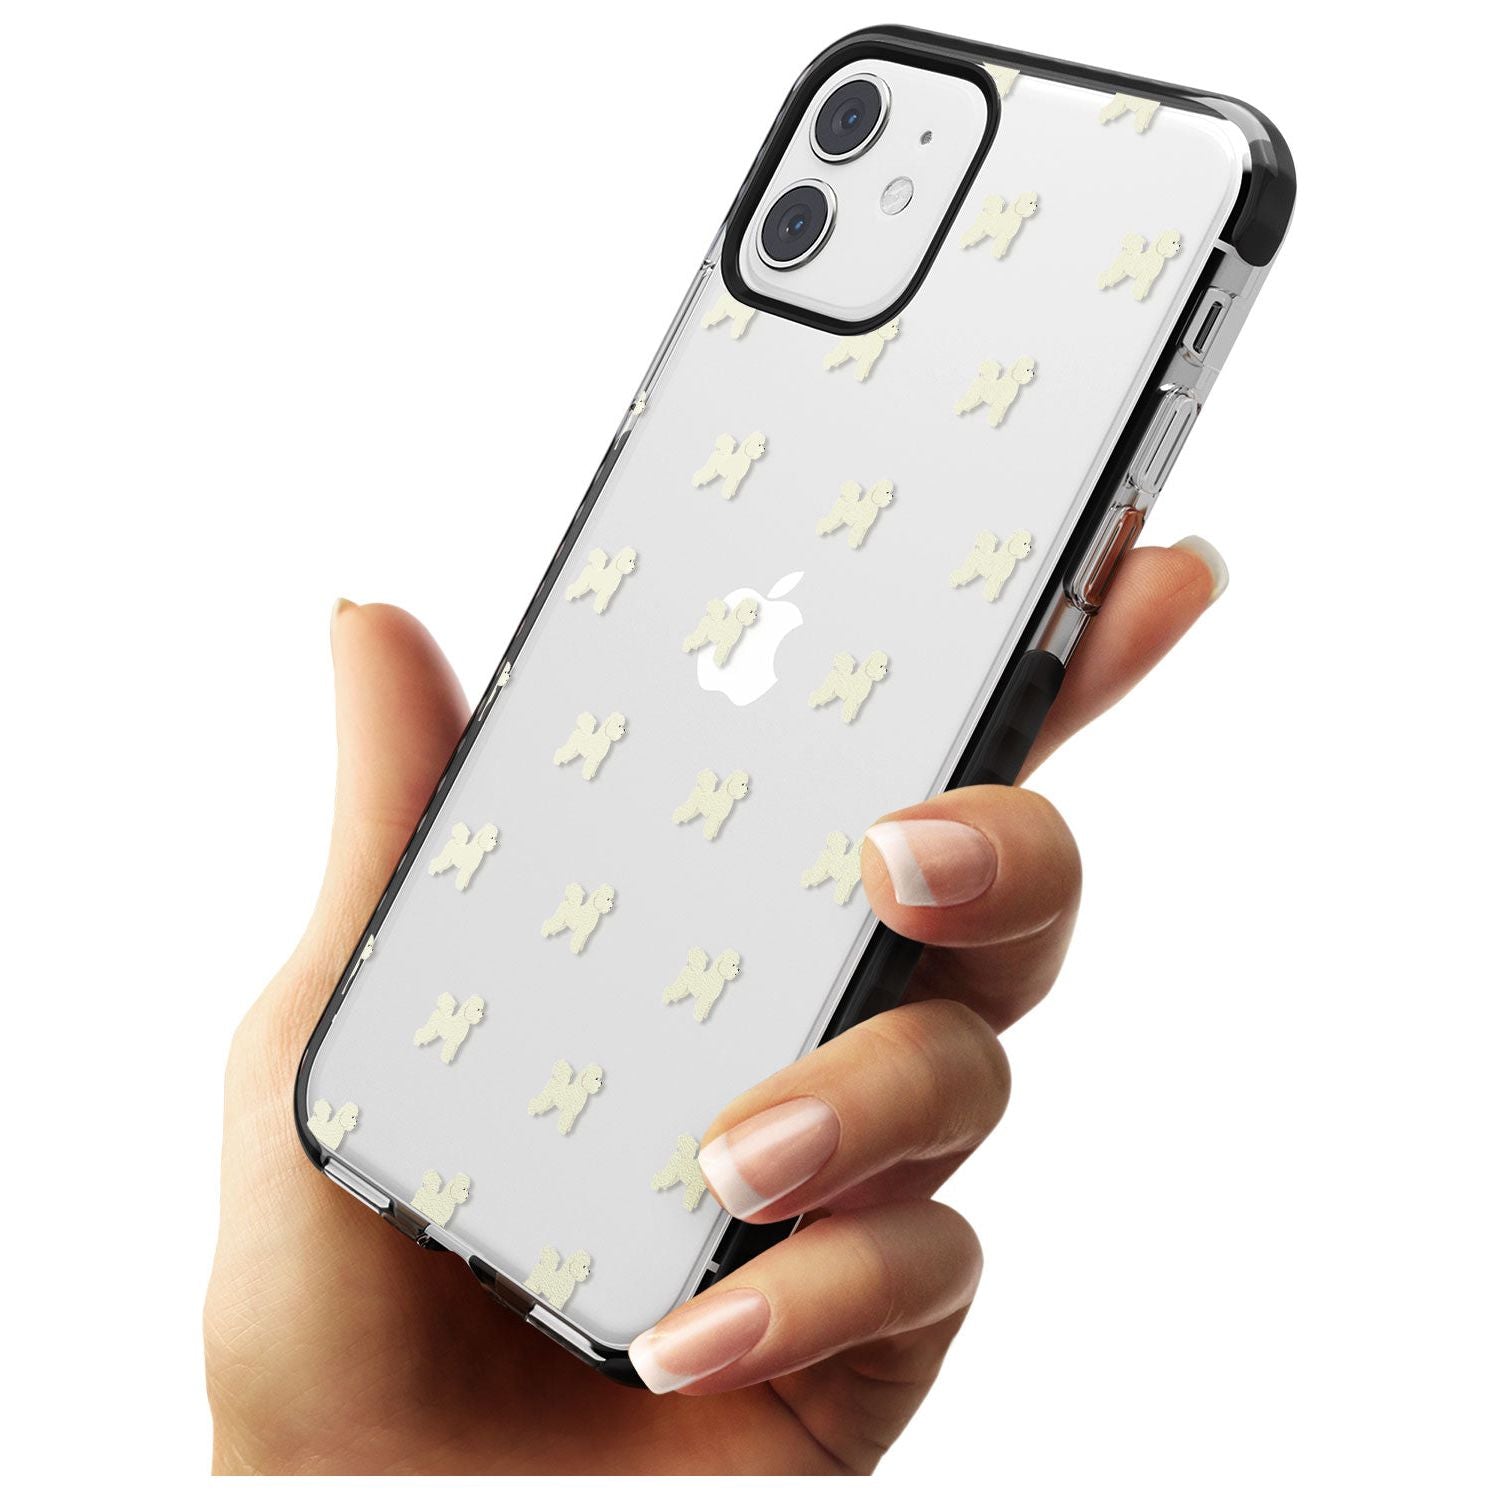 Bichon Frise Dog Pattern Clear Black Impact Phone Case for iPhone 11